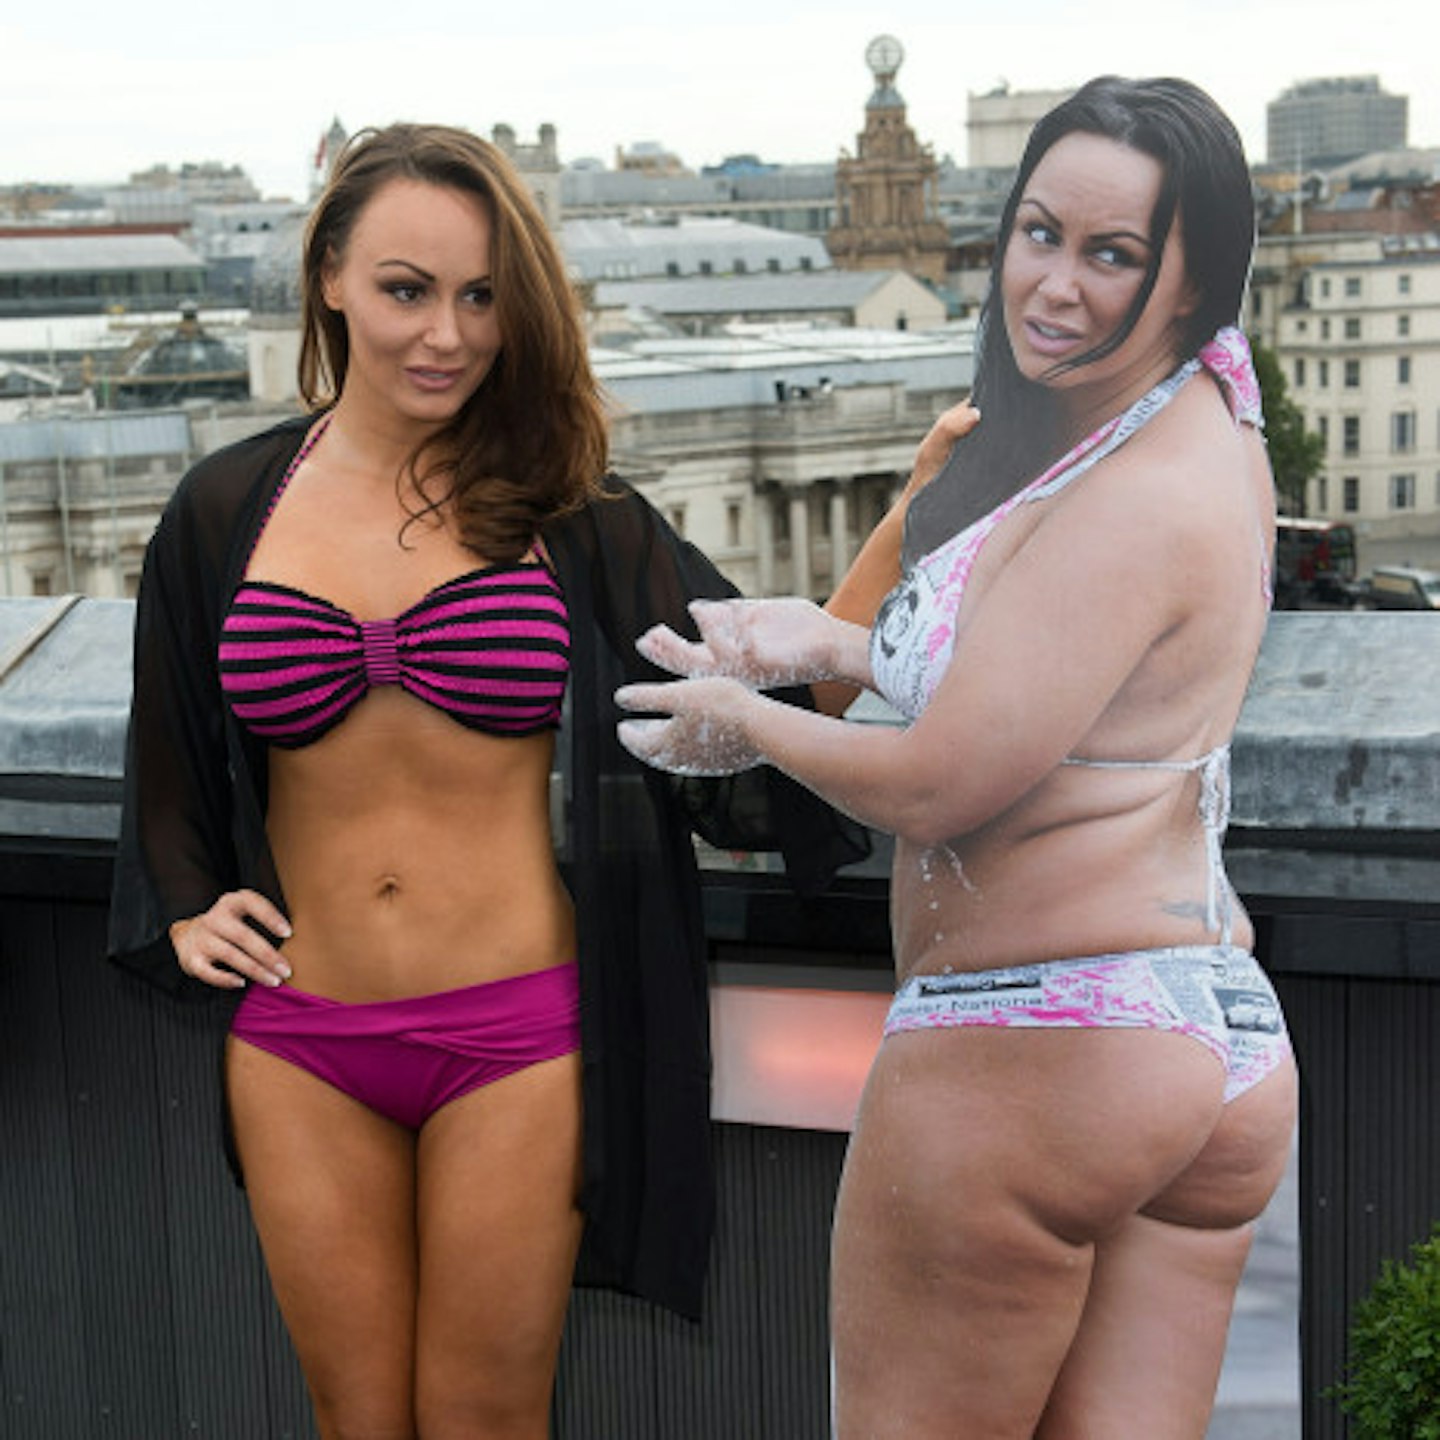 Chanelle showed off her weight loss last year